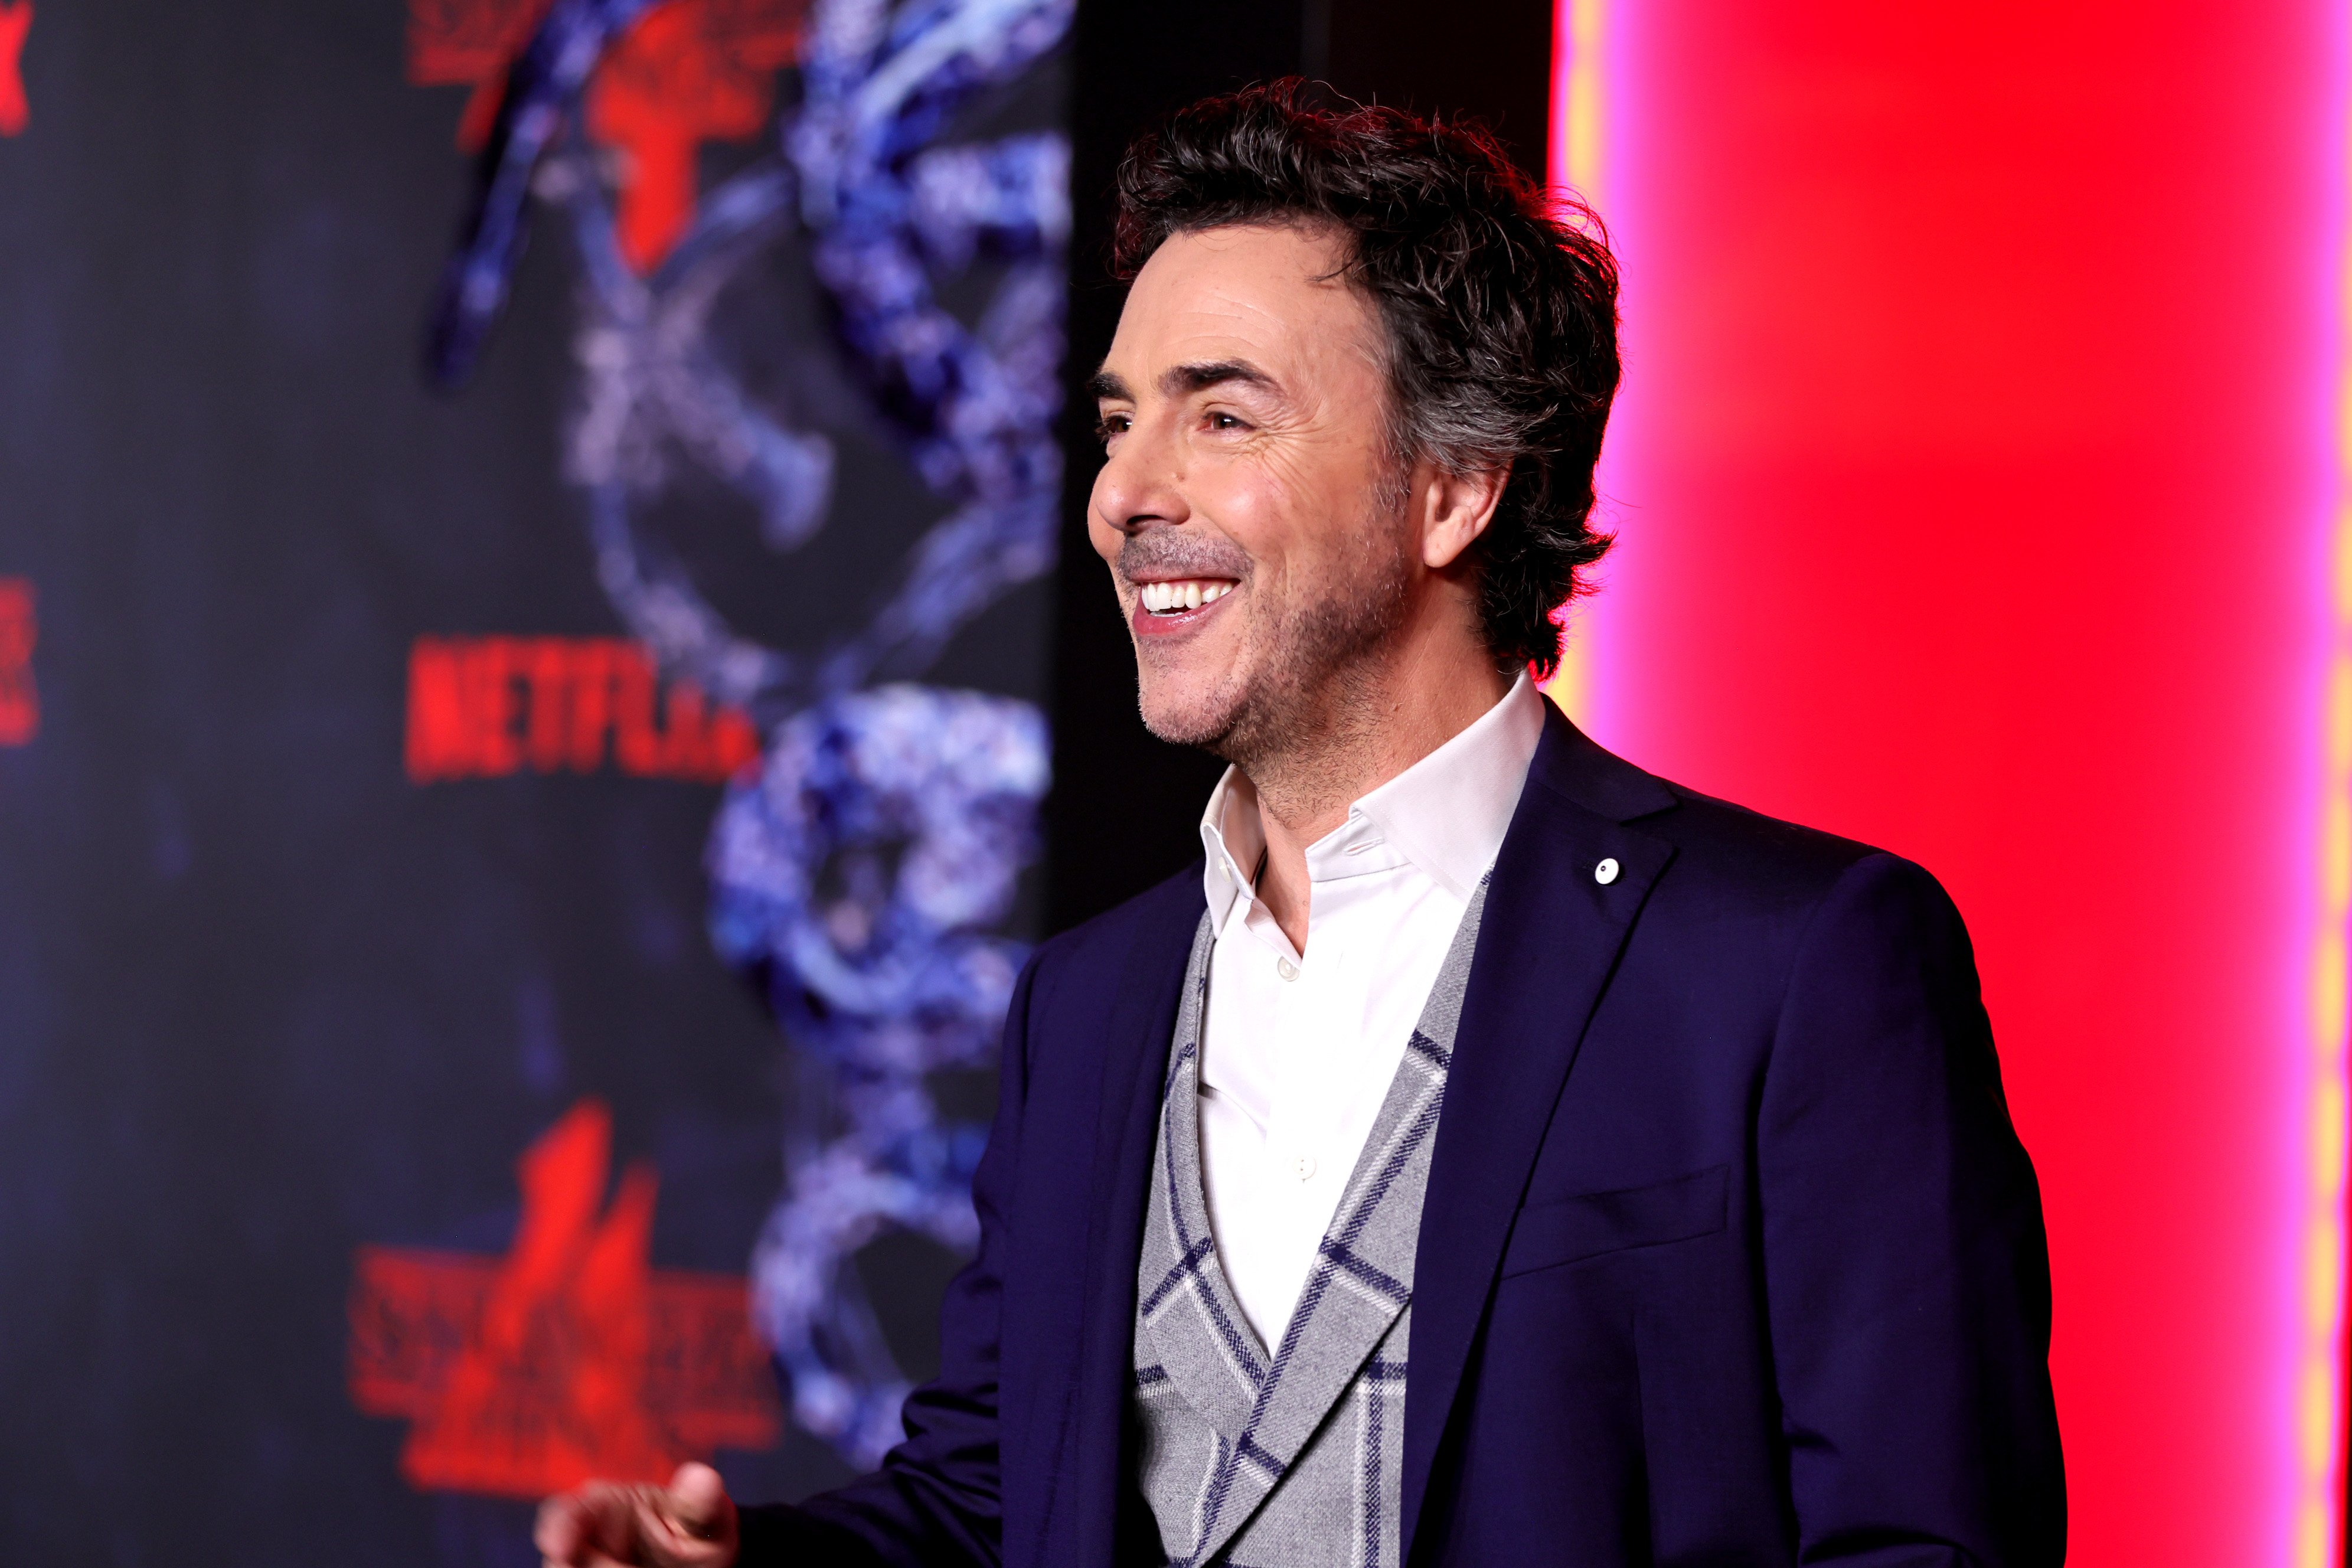 Shawn Levy attends the New York premiere of Stranger Things Season 4 for Netflix